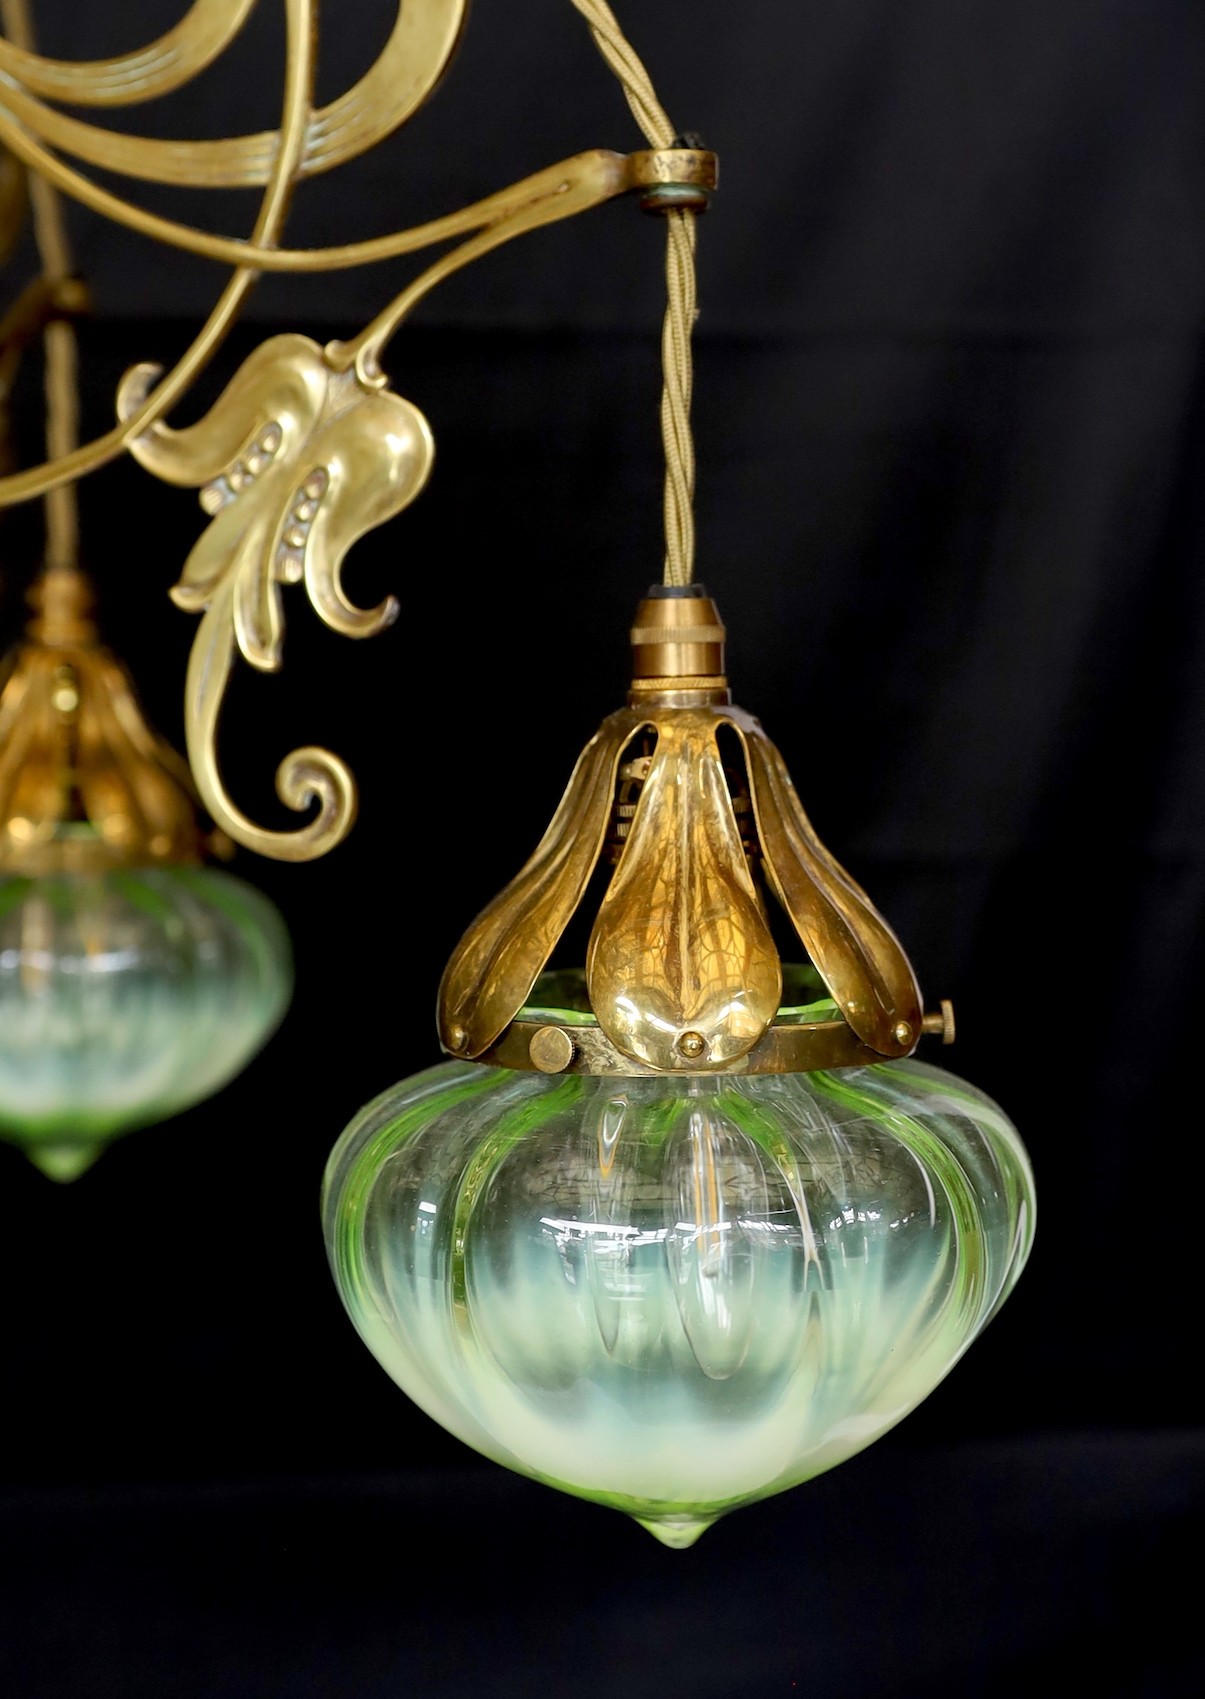 An English Arts & Crafts brass light fitting with scrolling foliate branches and tinted iridescent glass shades, height 68cm. width 46cm